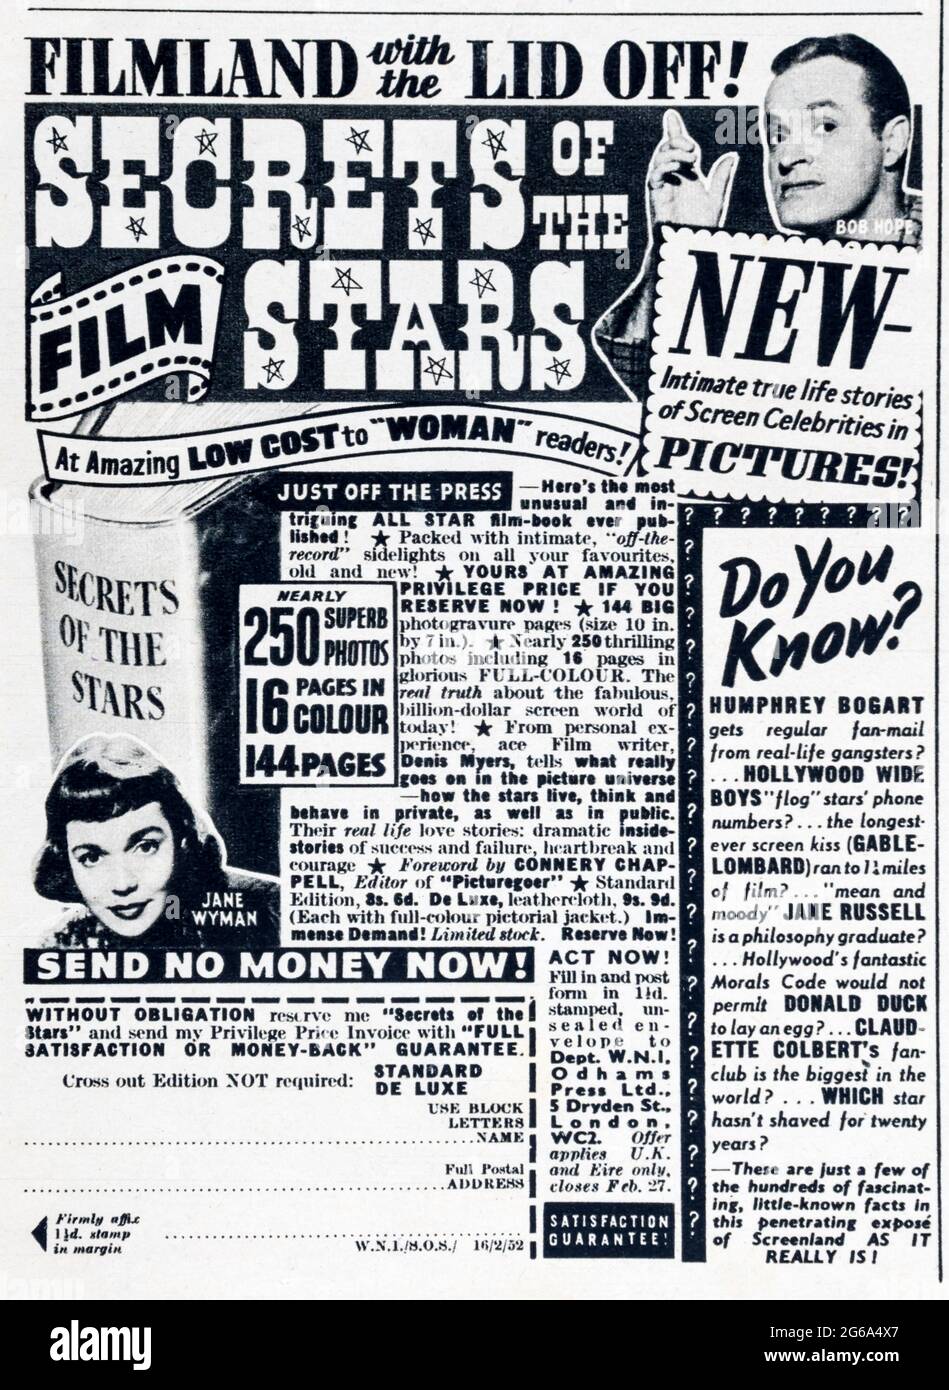 A 1950s magazine advertisement for Secrets of the Film Stars. Stock Photo